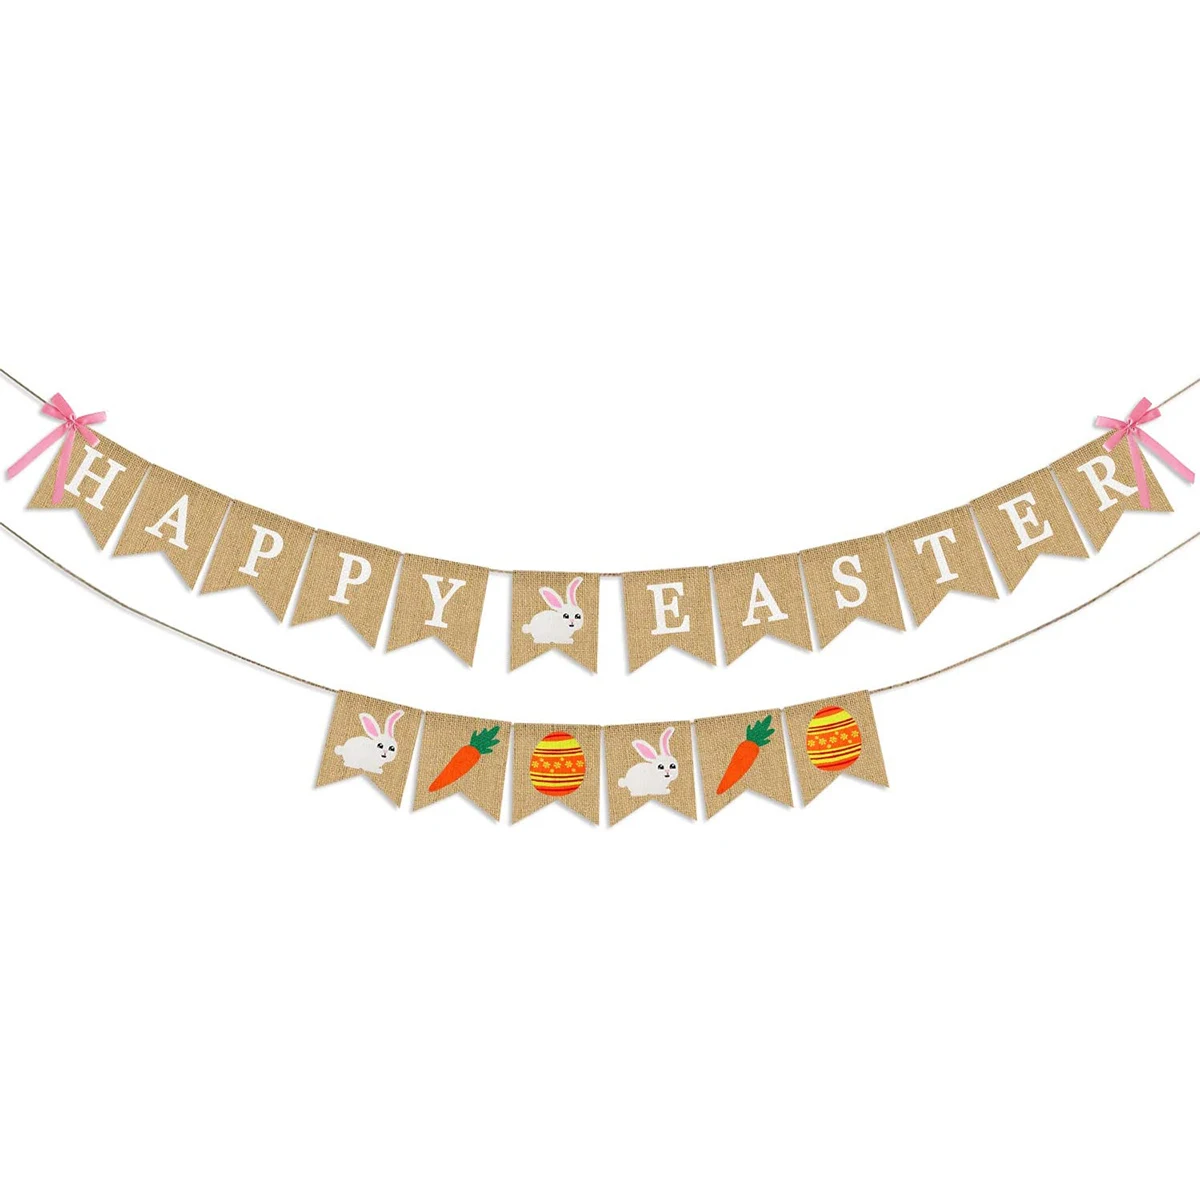 Happy Easter Text Bunting Garland Hanging Party Decorations 2 Metre